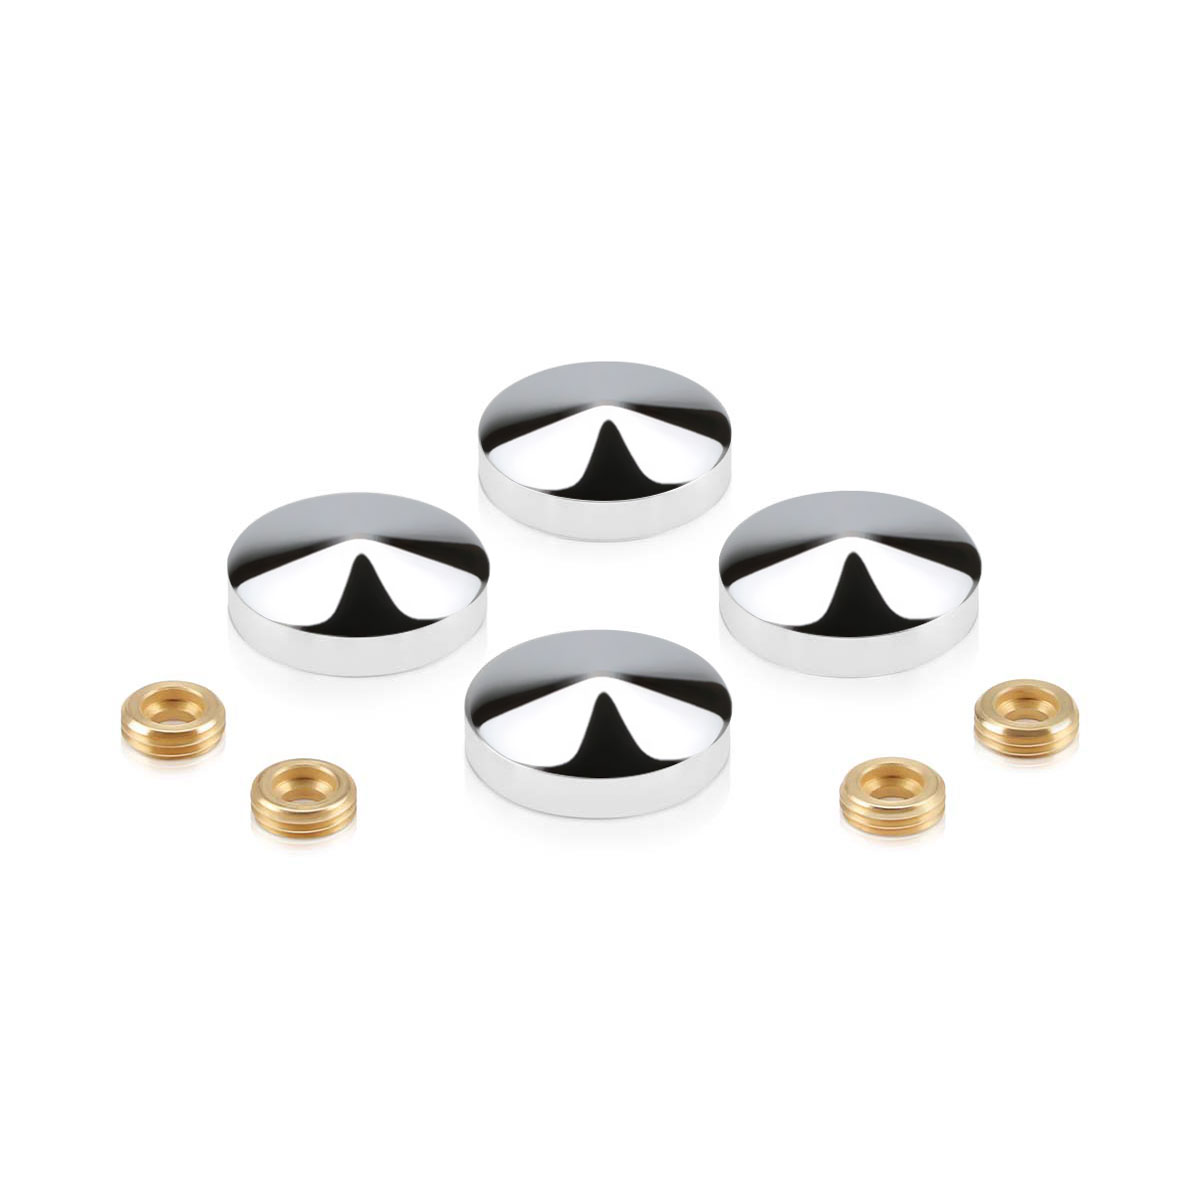 Set of Conical Screw Cover Diameter 1'', Polished Stainless Steel Finish (Indoor Use Only)